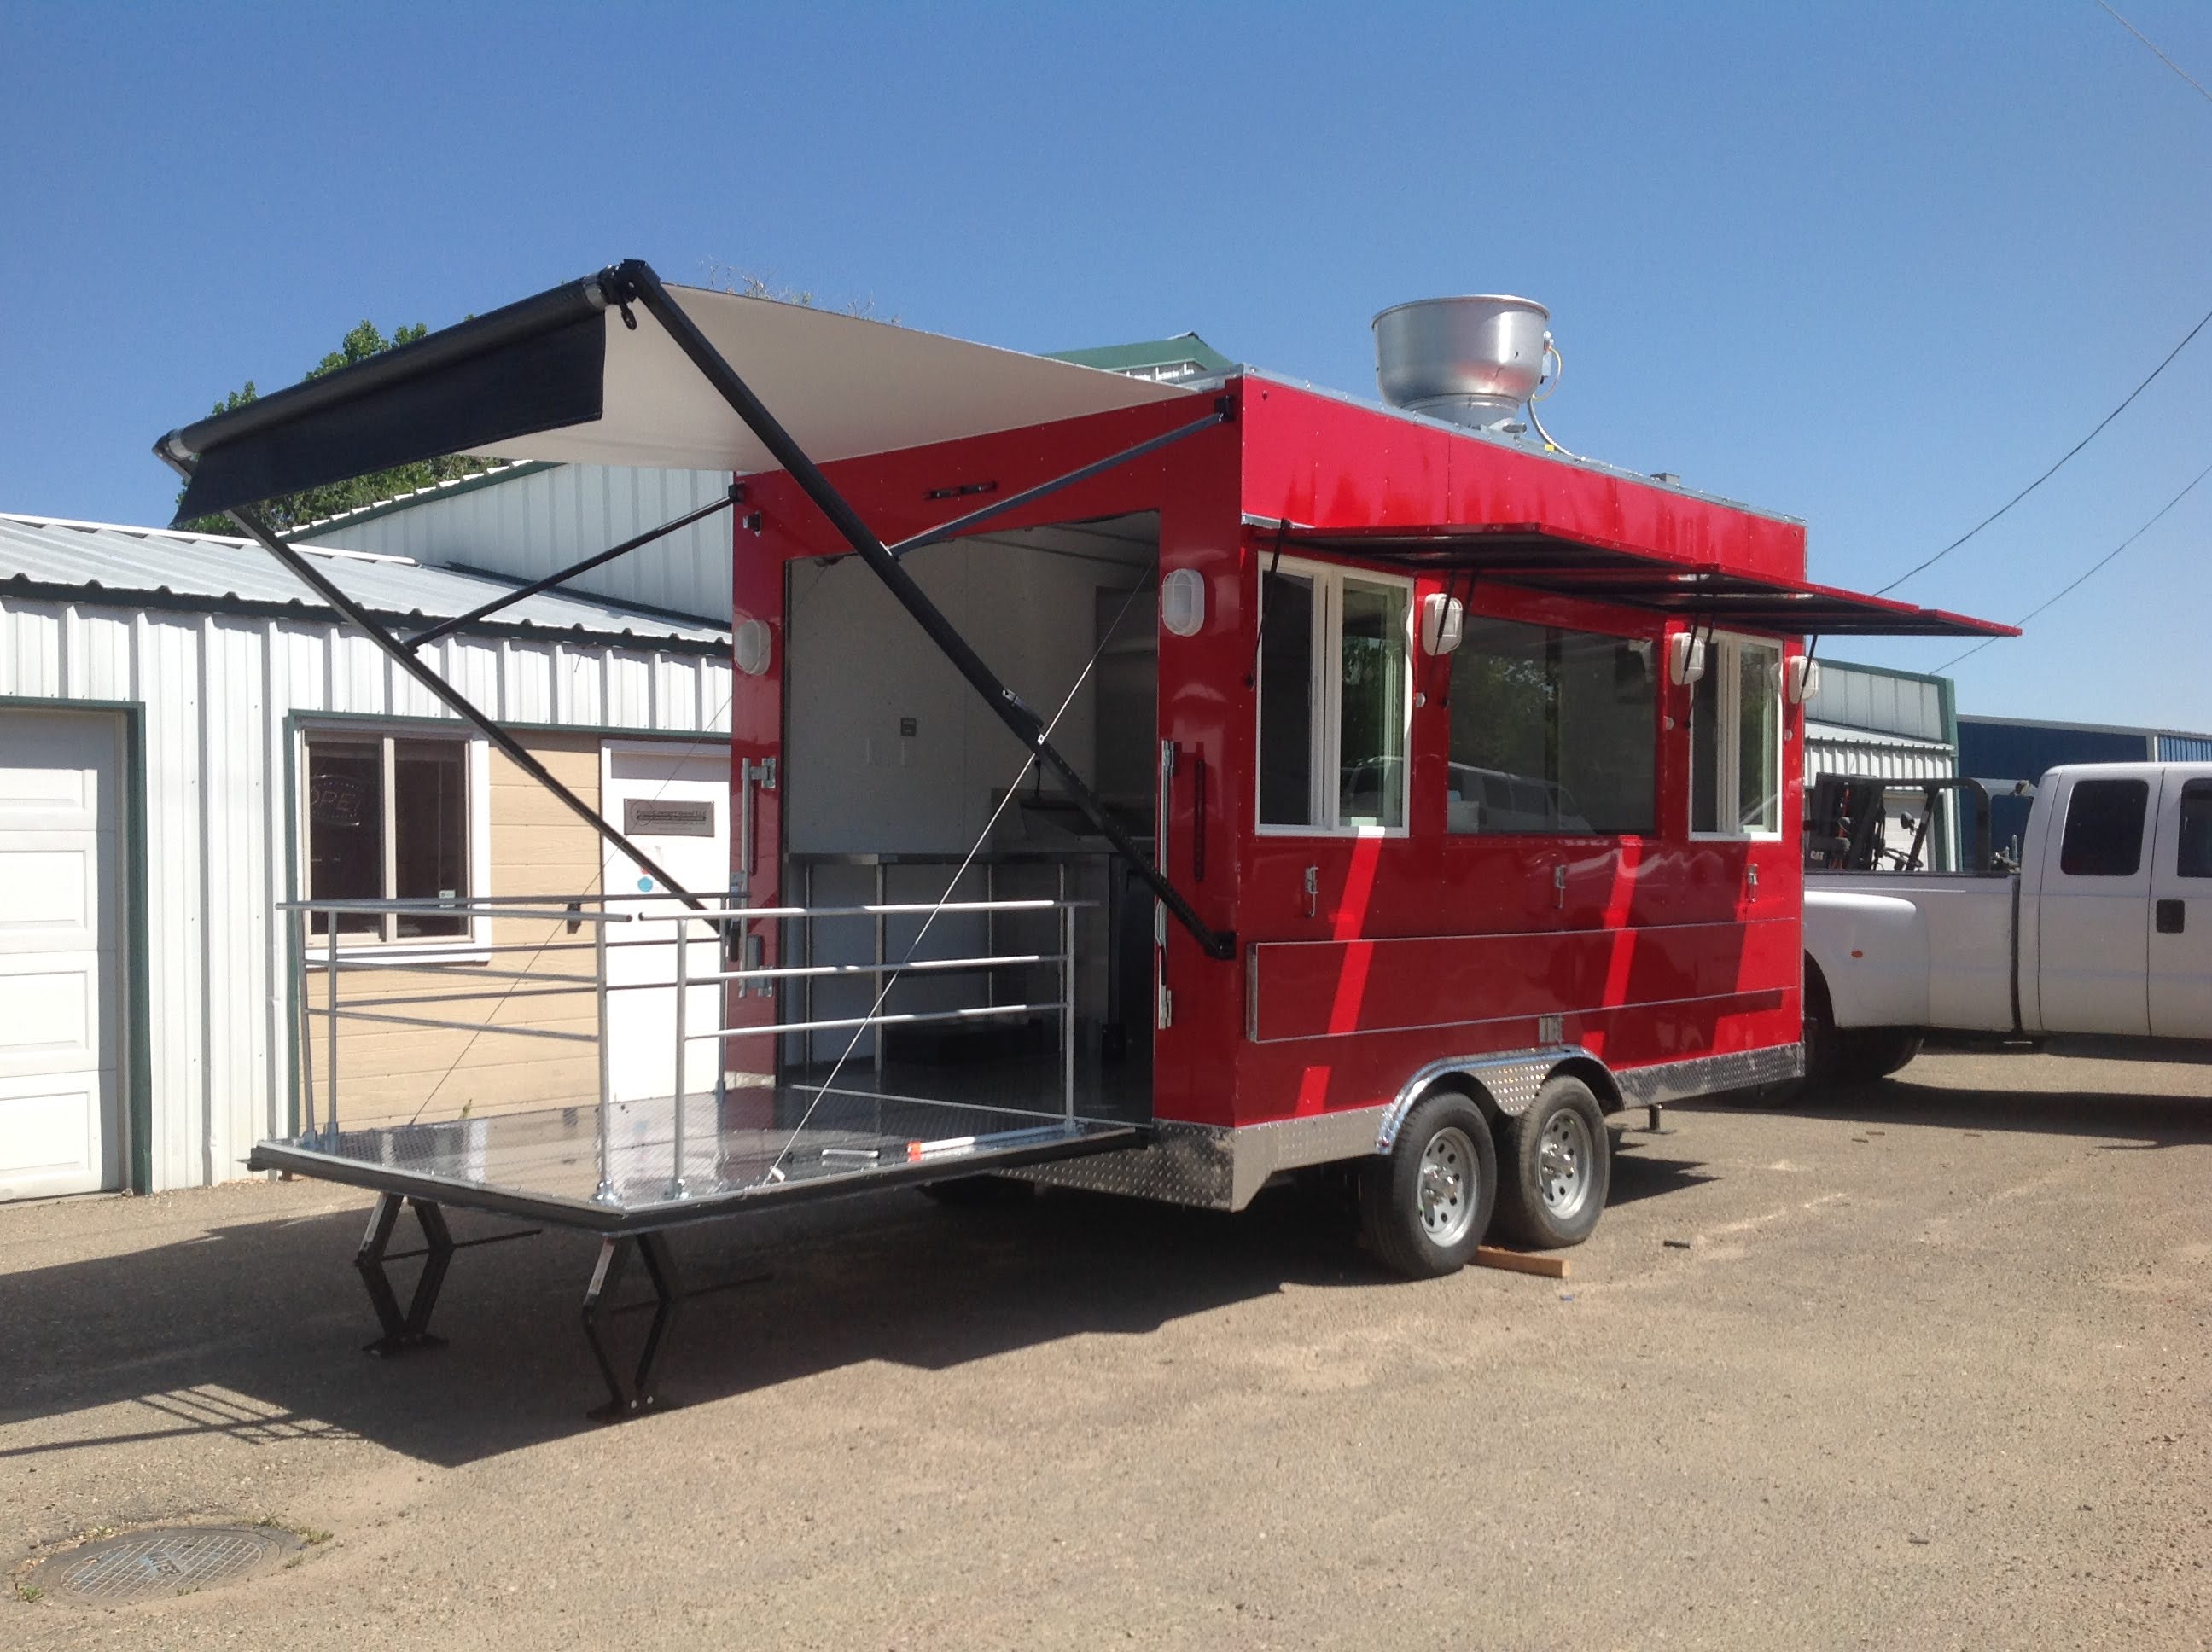 Concession Trailer Kitchen Custom made in Meridian Area